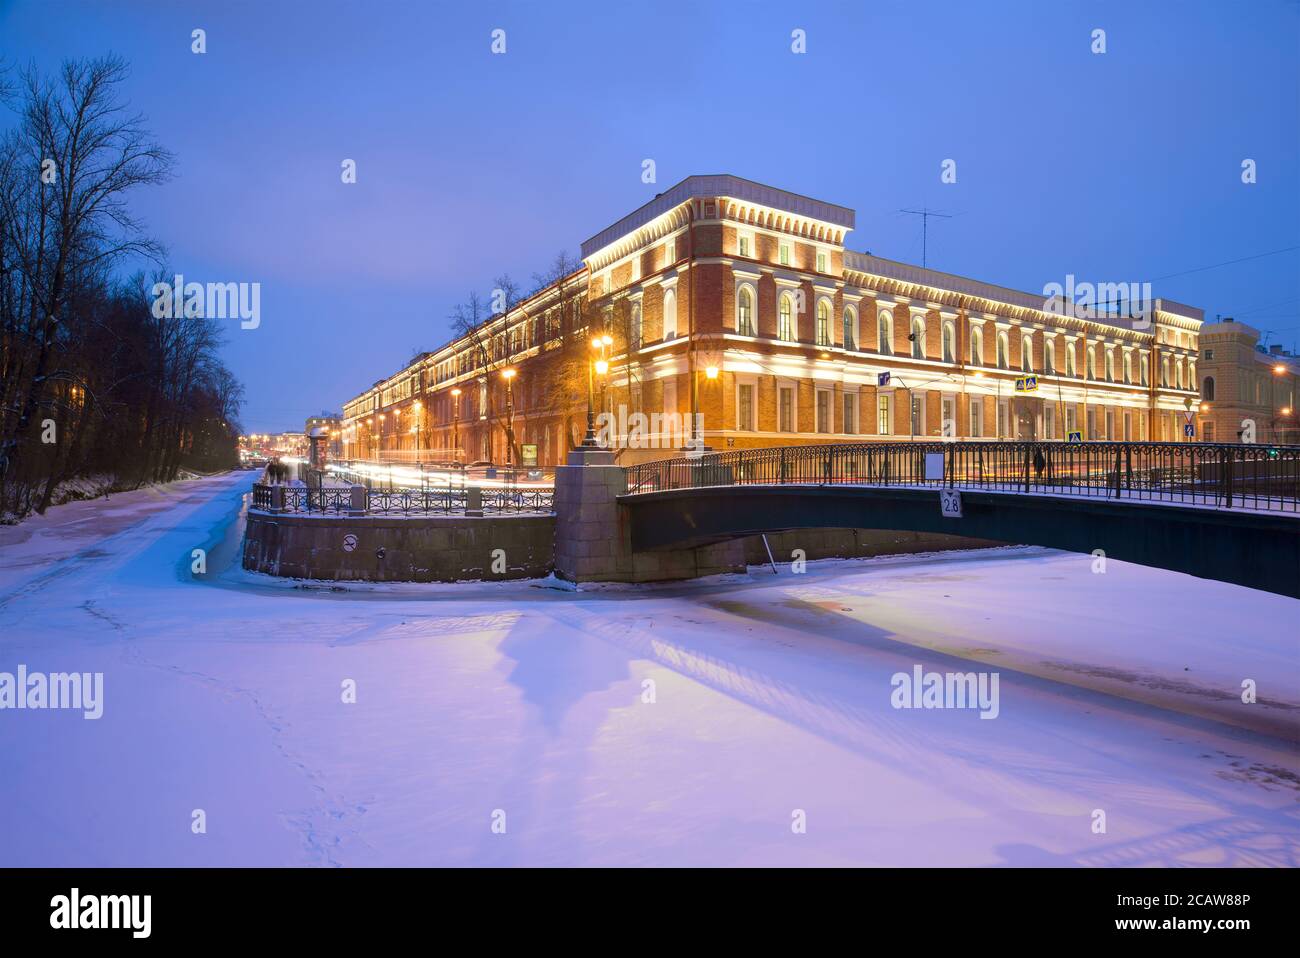 ST PETERSBURG, RUSSIA - JANUARY 30, 2018: View of the building of the Central Naval Museum from the side of the Moika river in January twilight Stock Photo